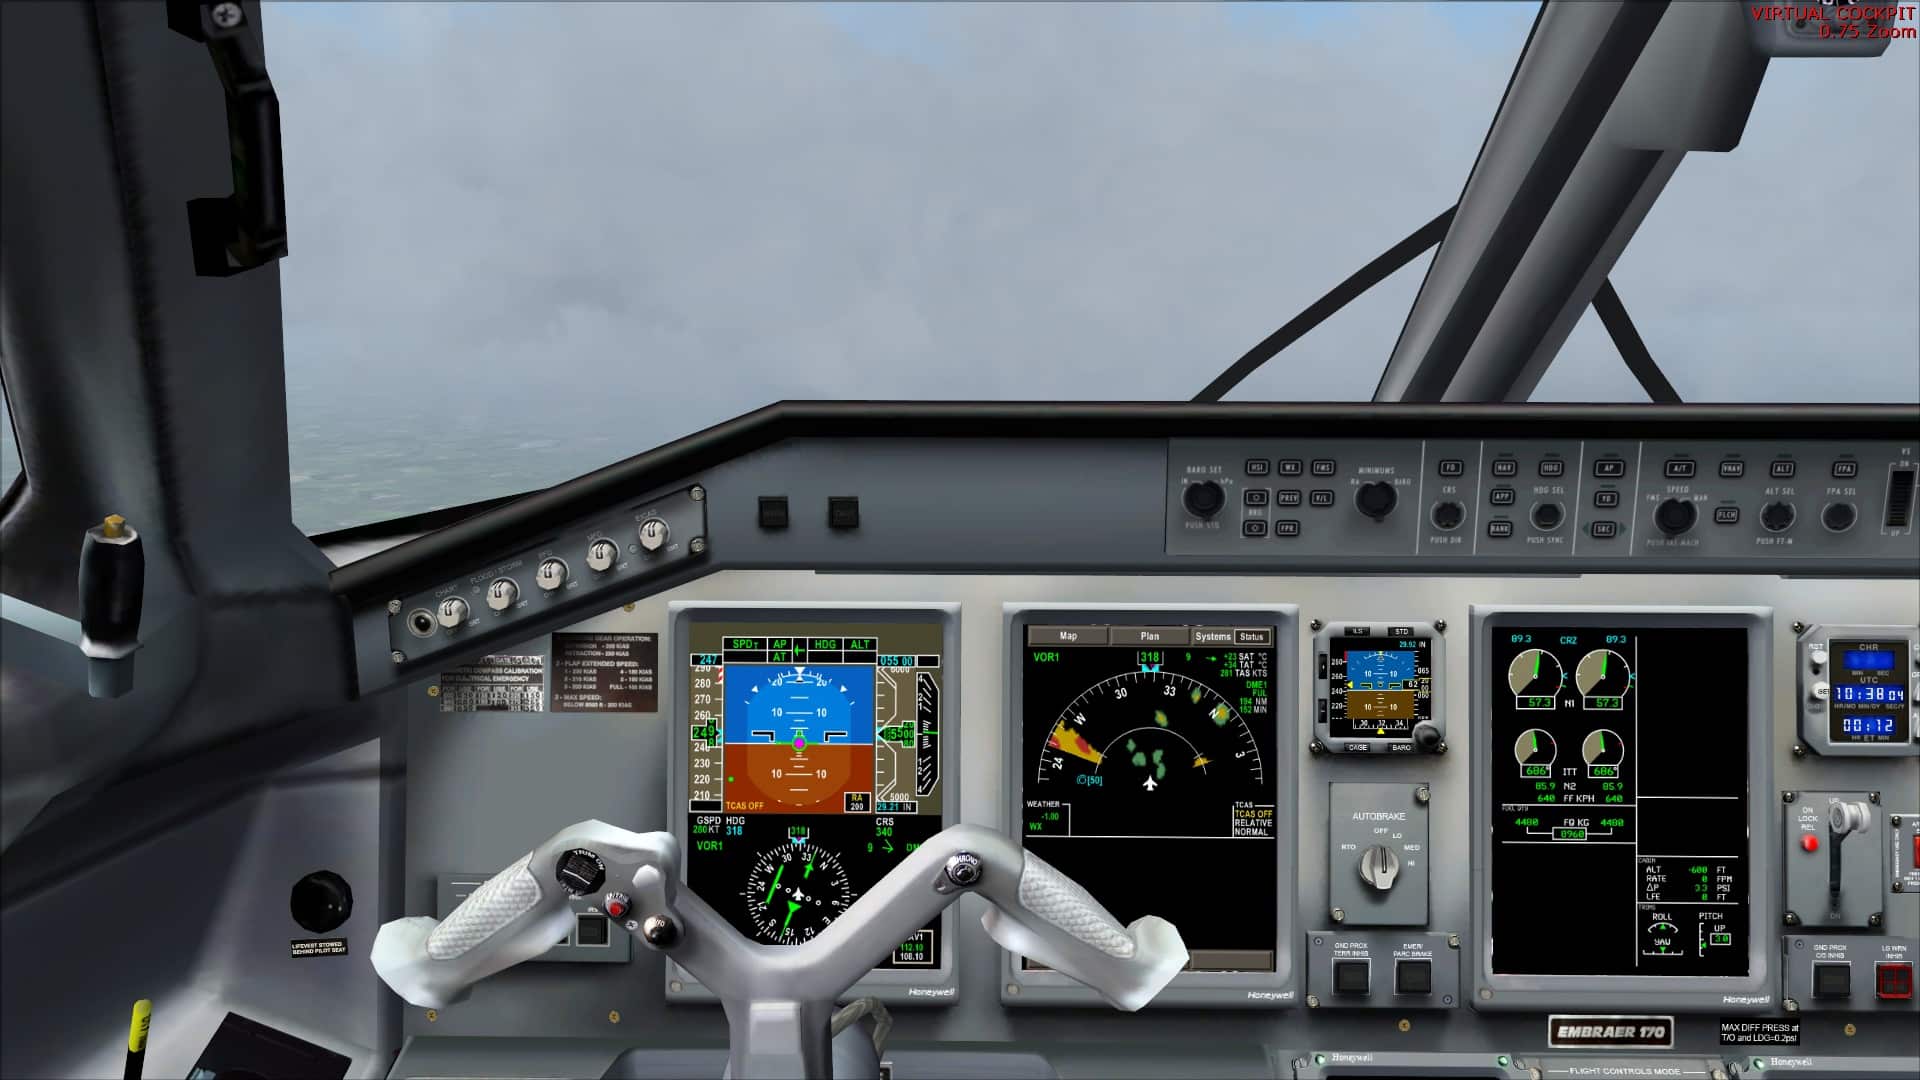 Review: Wilco’s E-Jets for FS2004 and FSX.